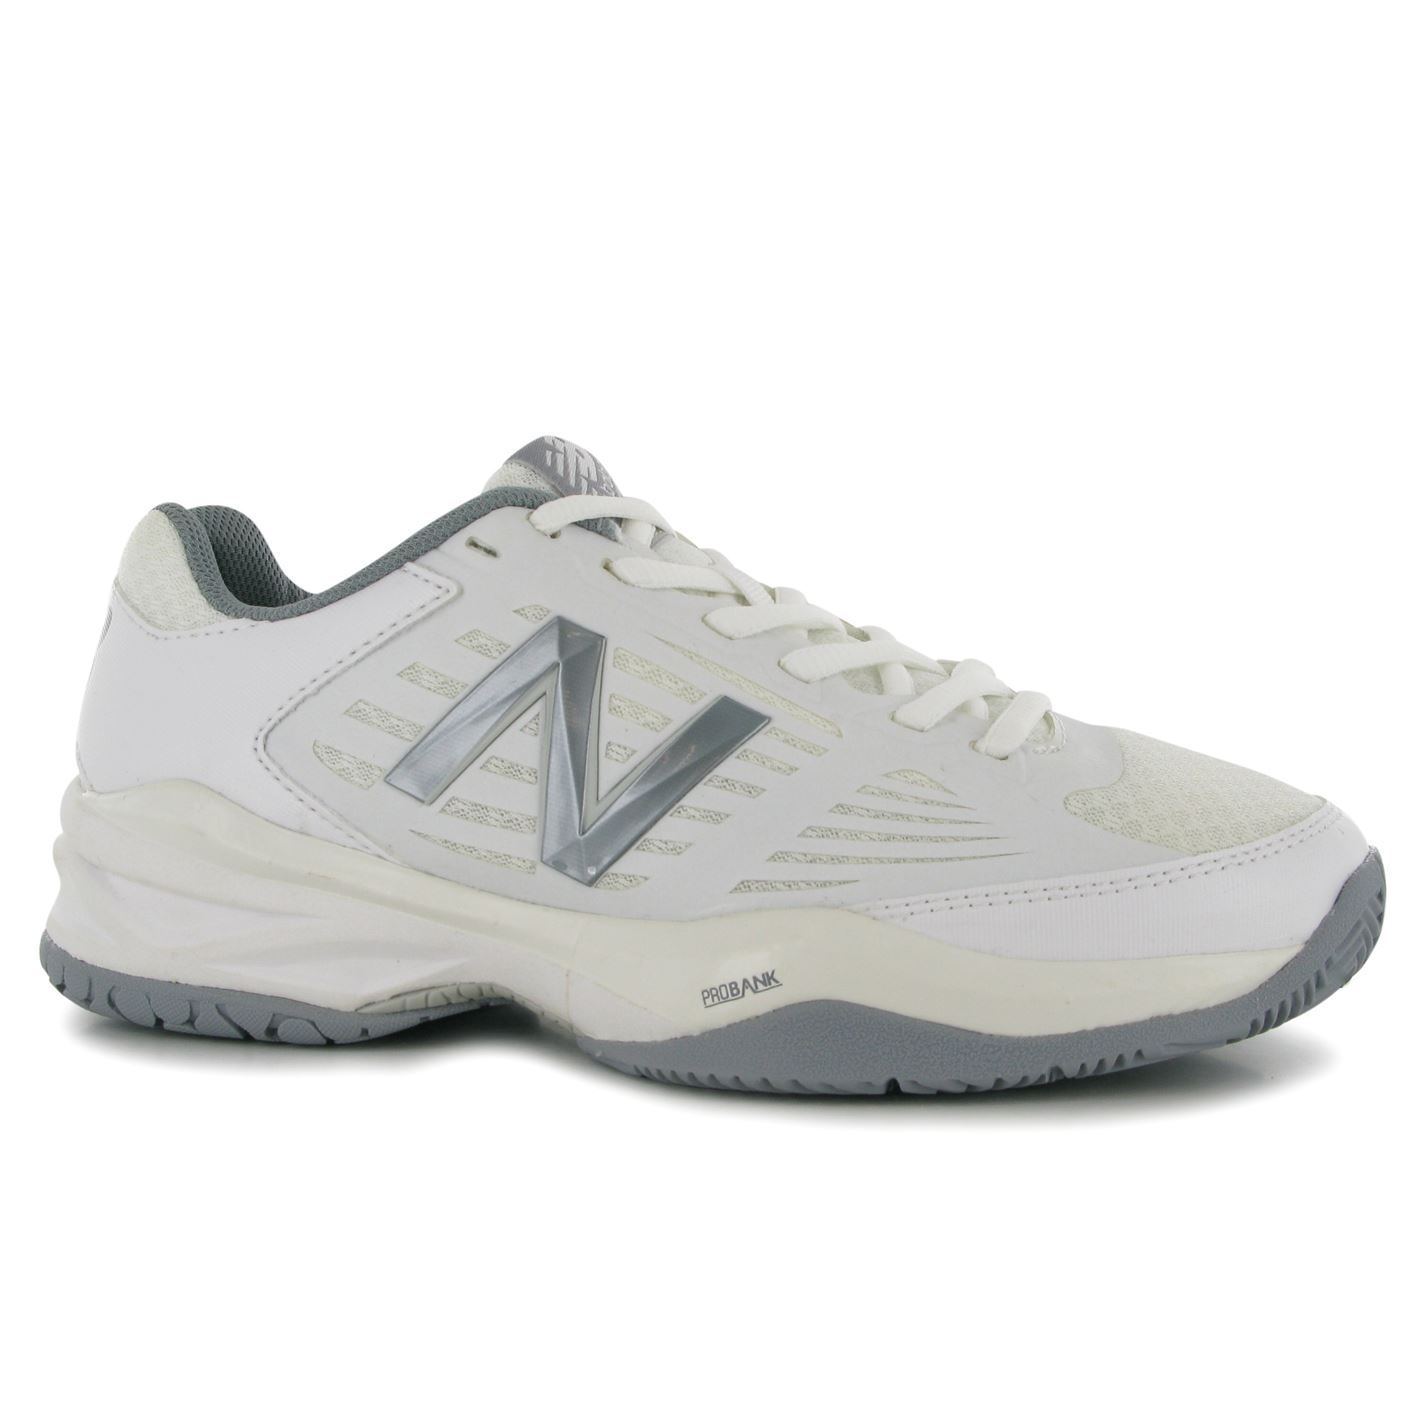 New Balance 896 v1 Tennis Shoes Womens White/Silver Court Trainers Sneakers